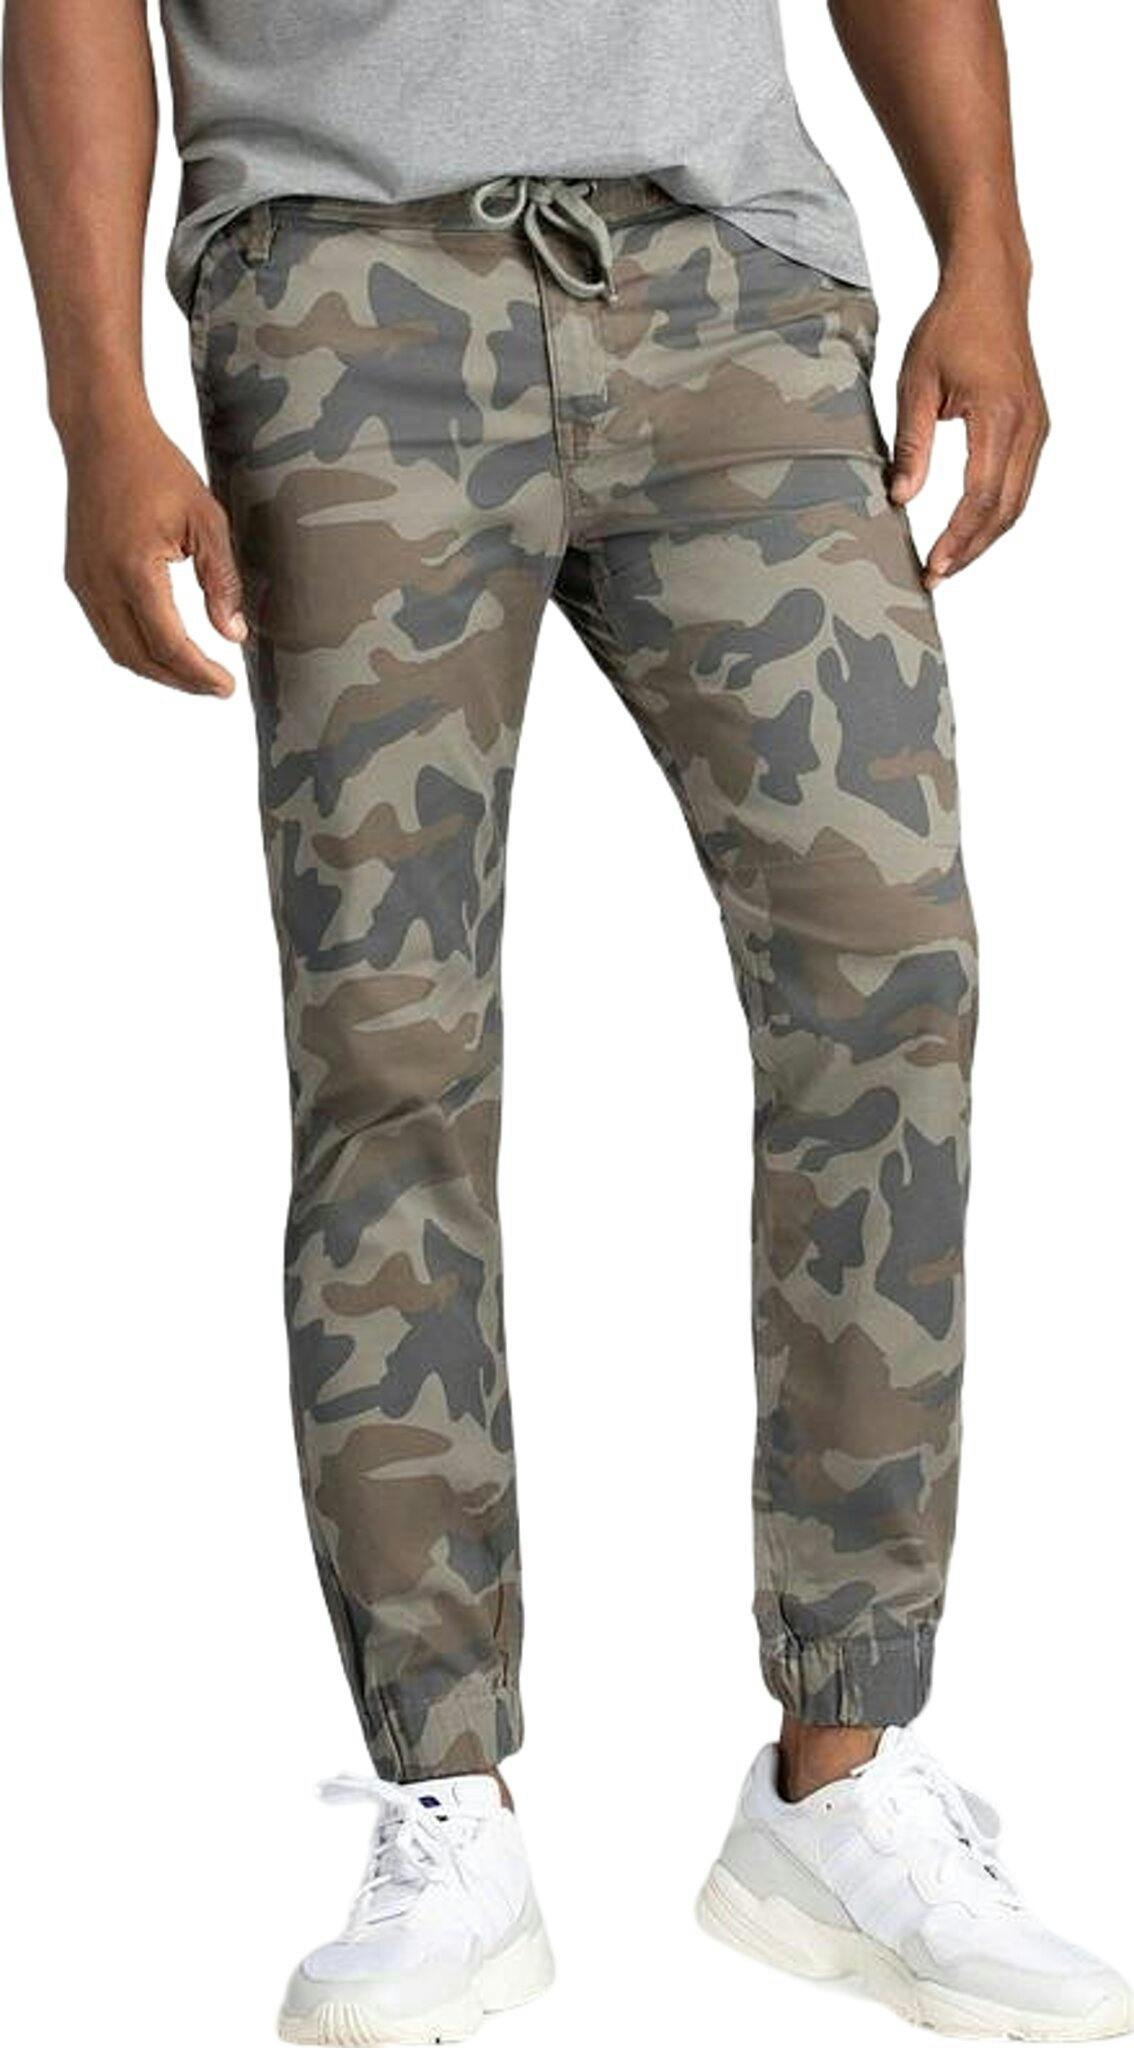 Product image for Live Free Jogger - Men's